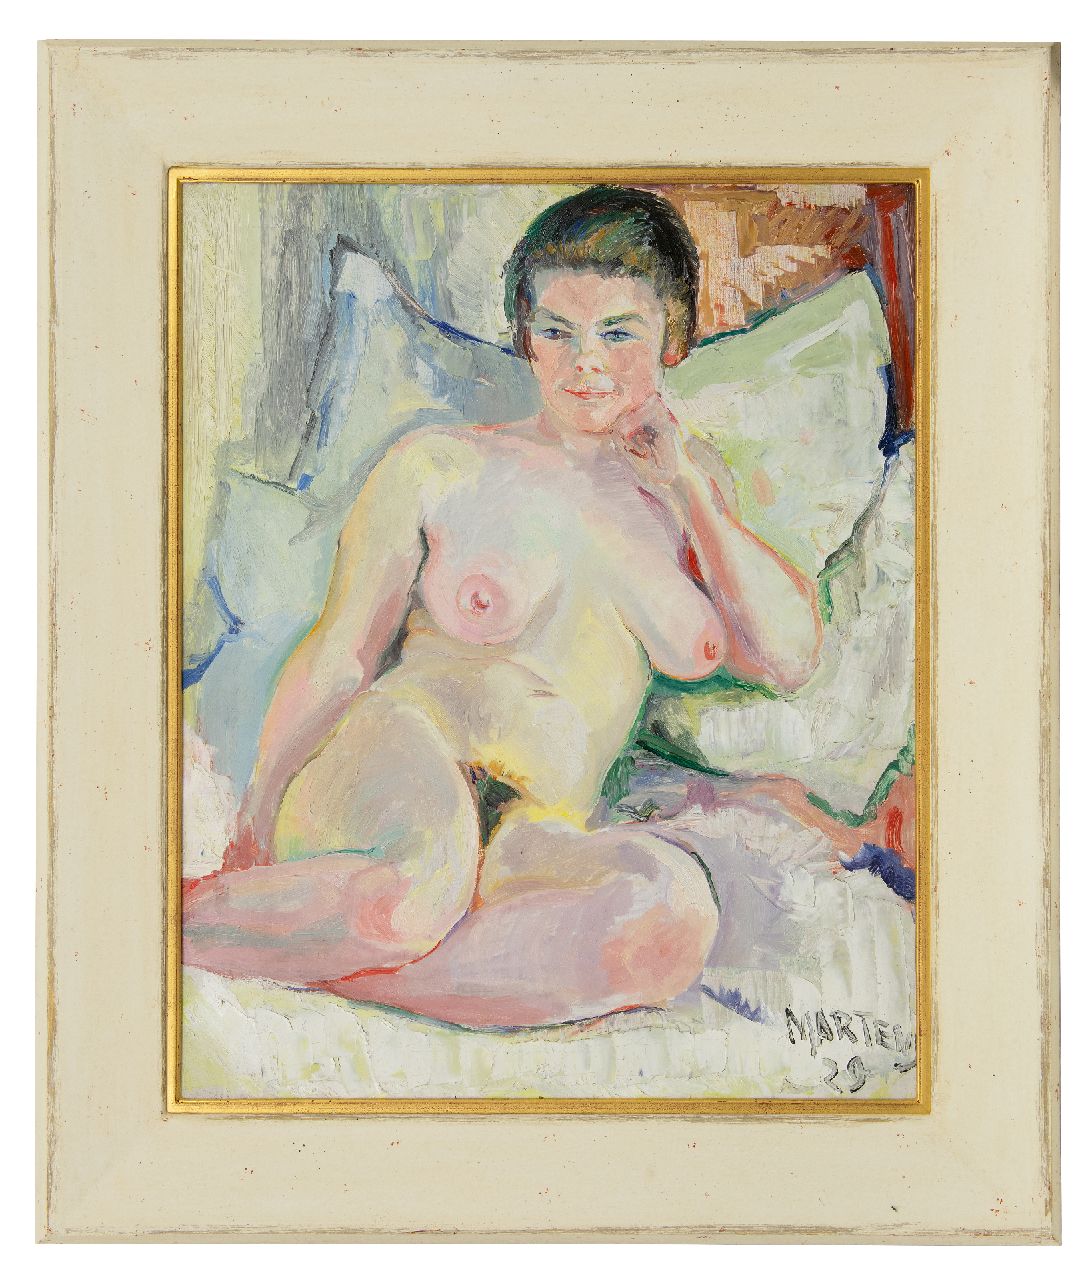 Martens G.G.  | Gijsbert 'George' Martens | Paintings offered for sale | Reclyning nude, oil on canvas 80.3 x 64.7 cm, signed l.r. and dated '29